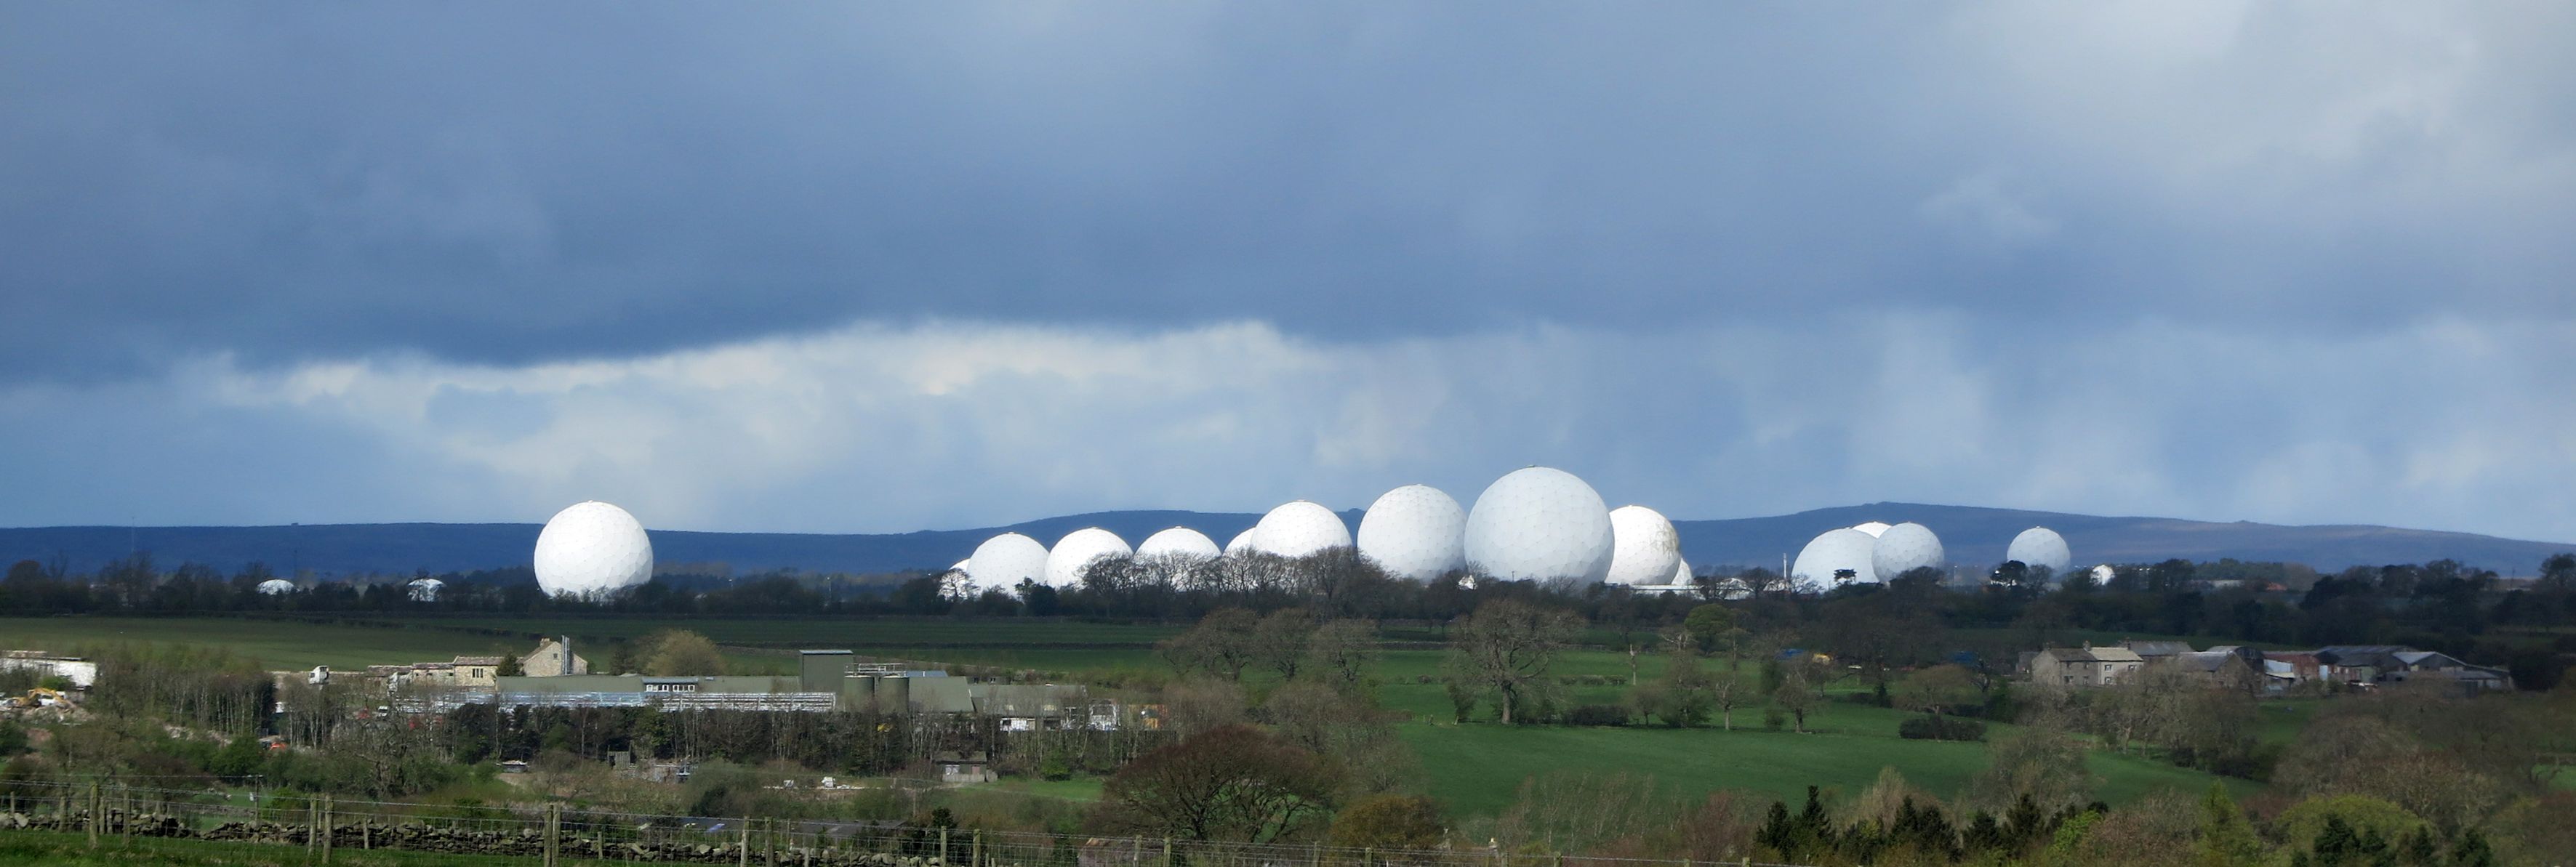 U.S RAF 'Communications and Intelligence' base, Menwith Hills, North Yorkshire